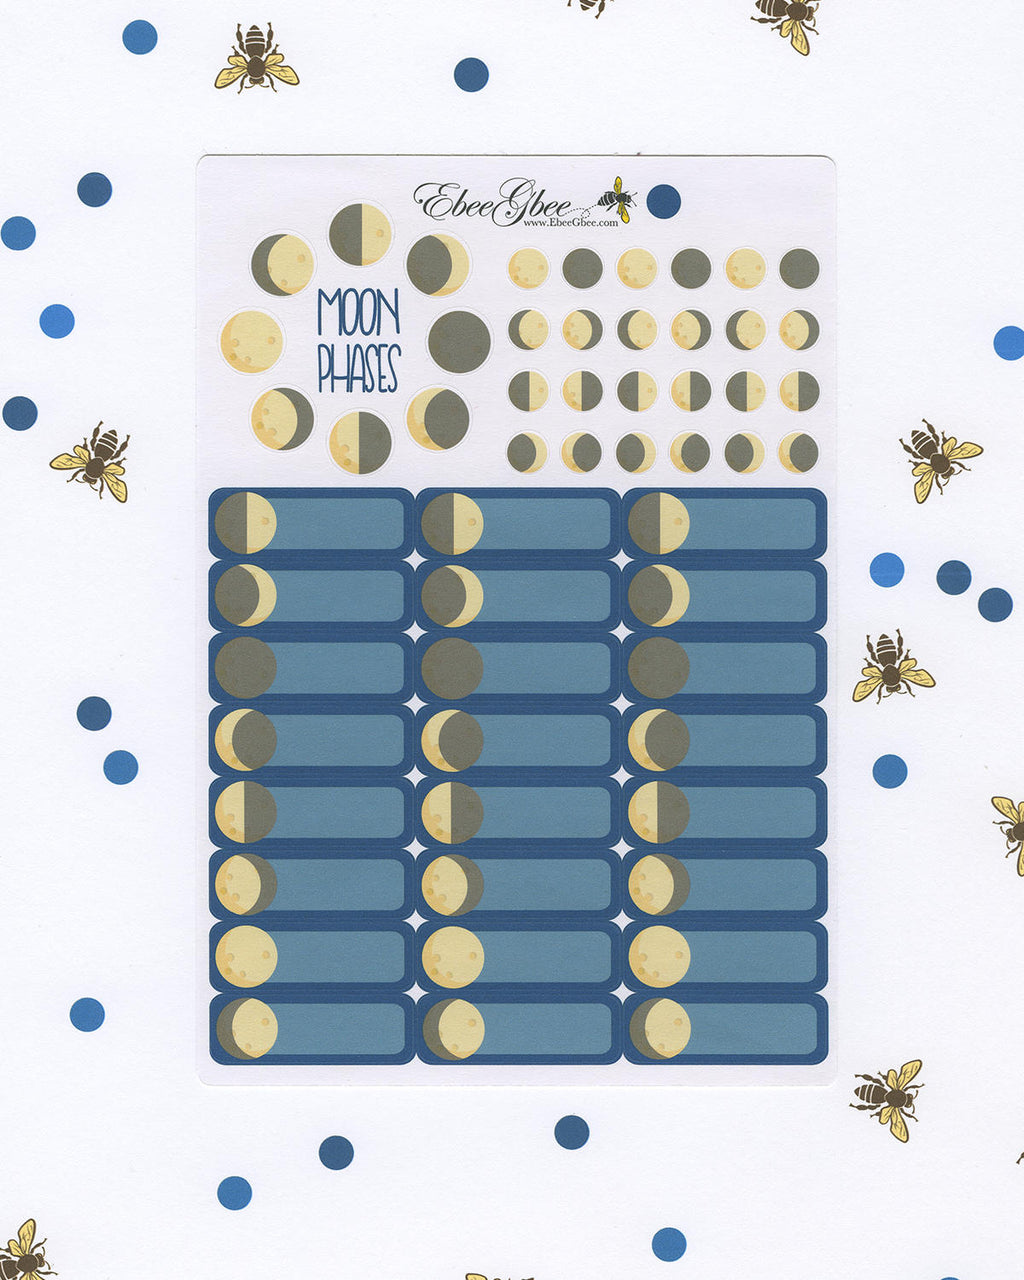 MOON PHASES Boxes Planner Stickers |  BeeColorful